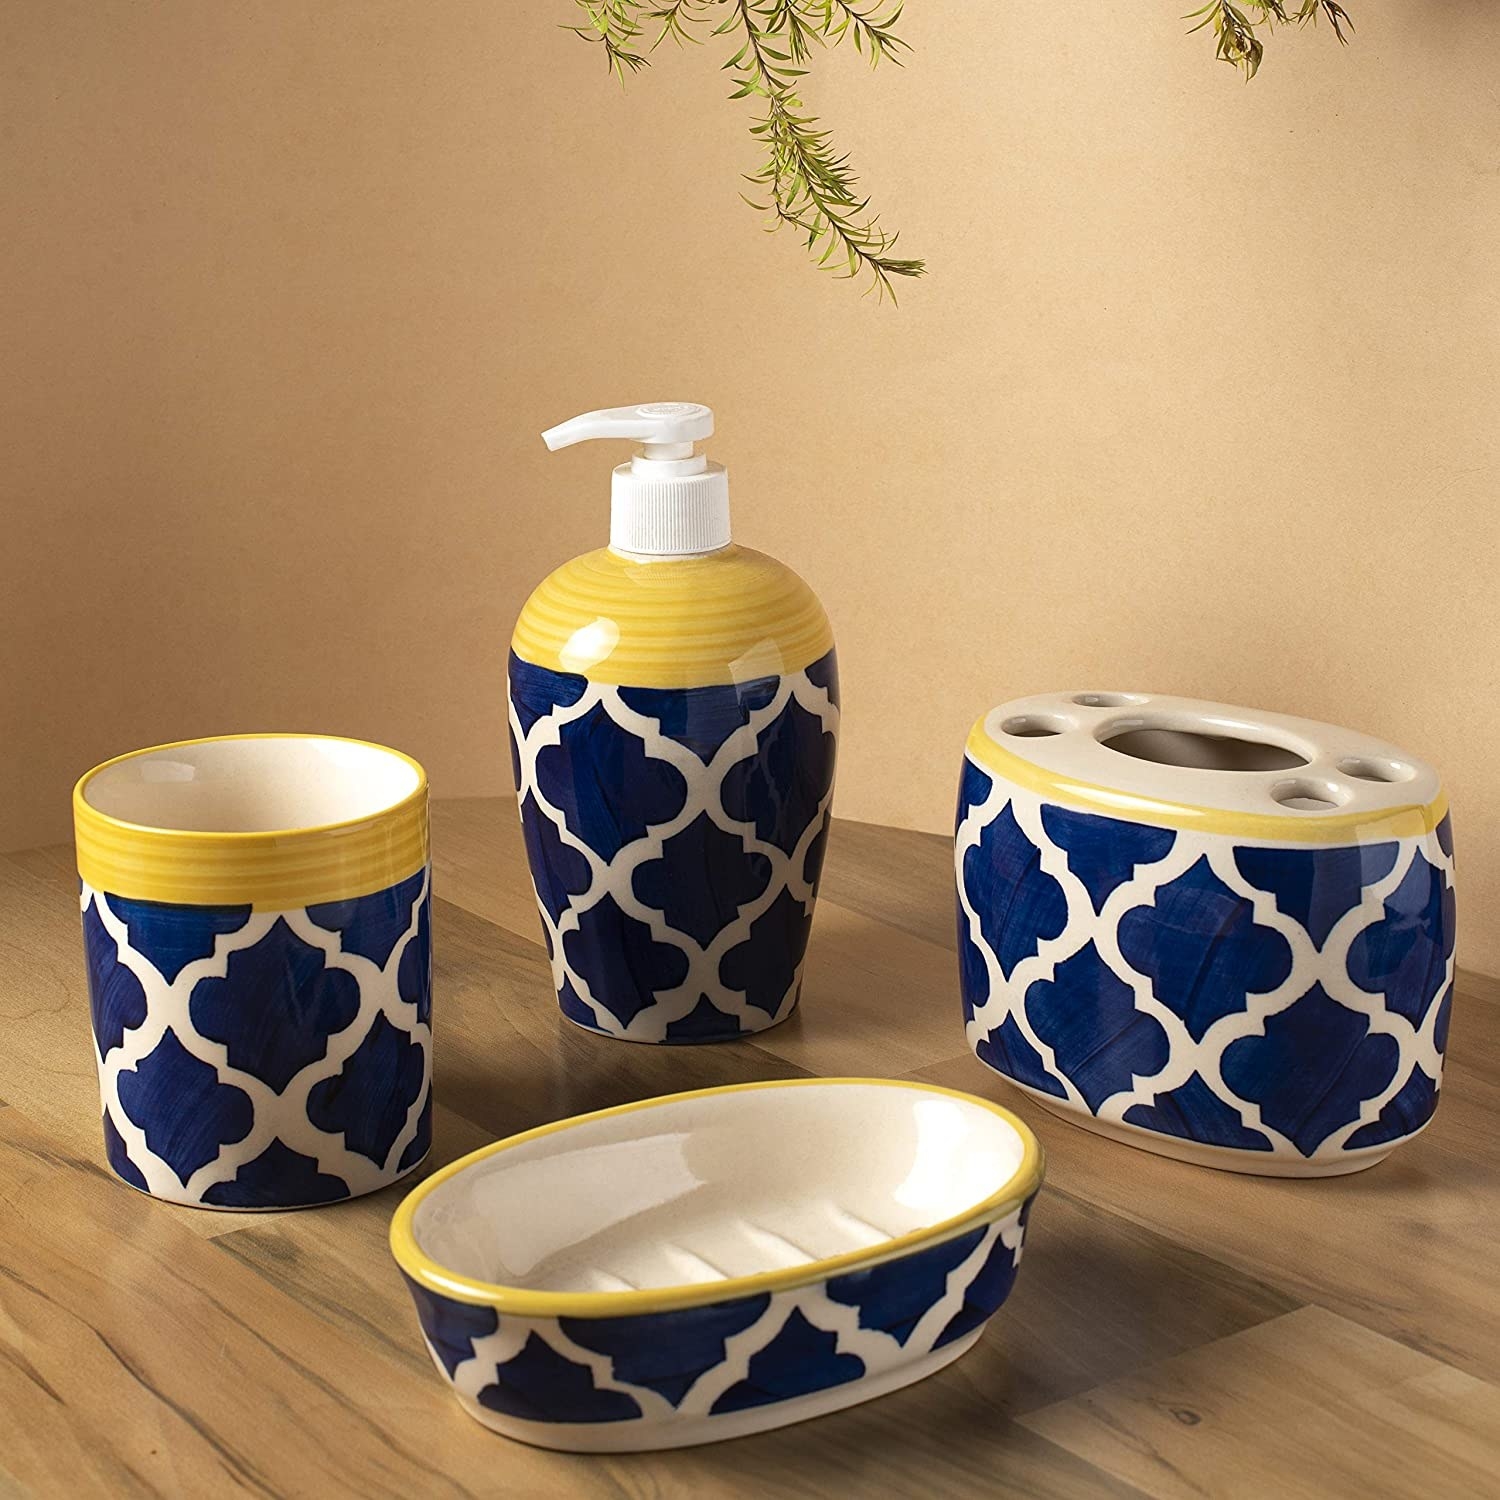 A blue and white bathroom accessories set